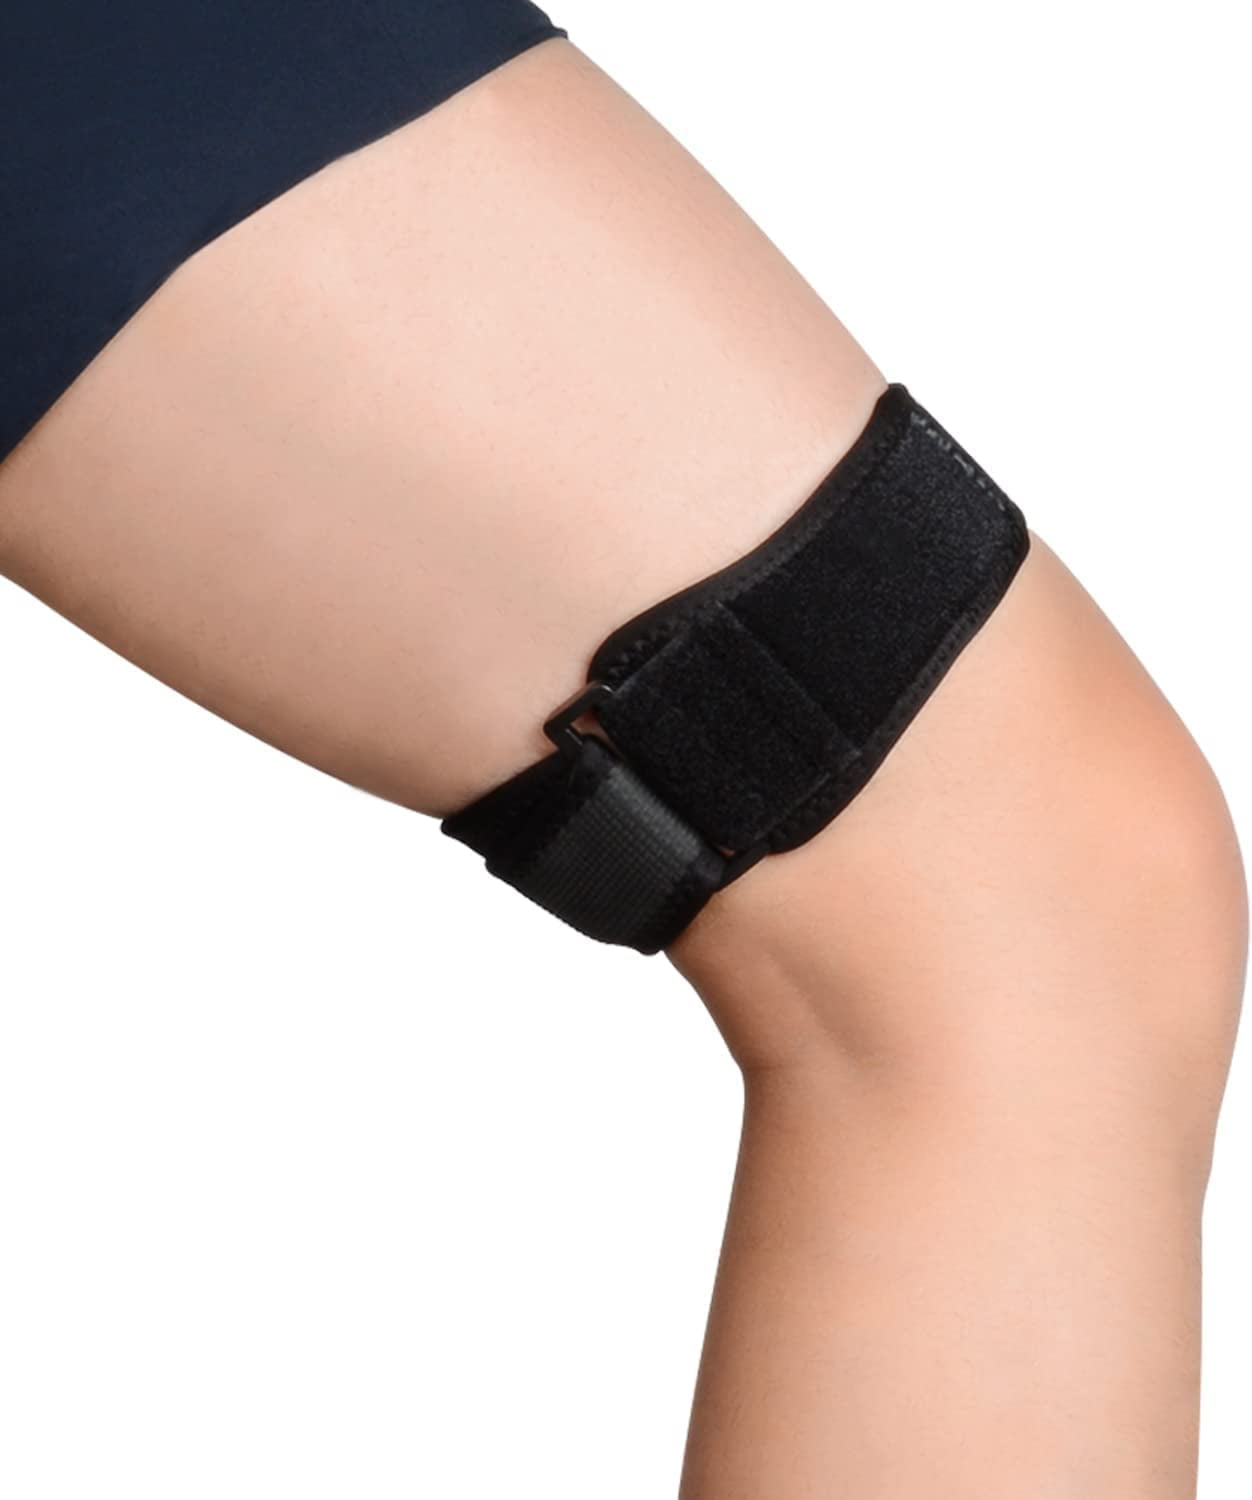 SupreGear IT Band Strap for Knee, Adjustable Comfortable Iliotibial Band  Wrap ITB Strap, Black 